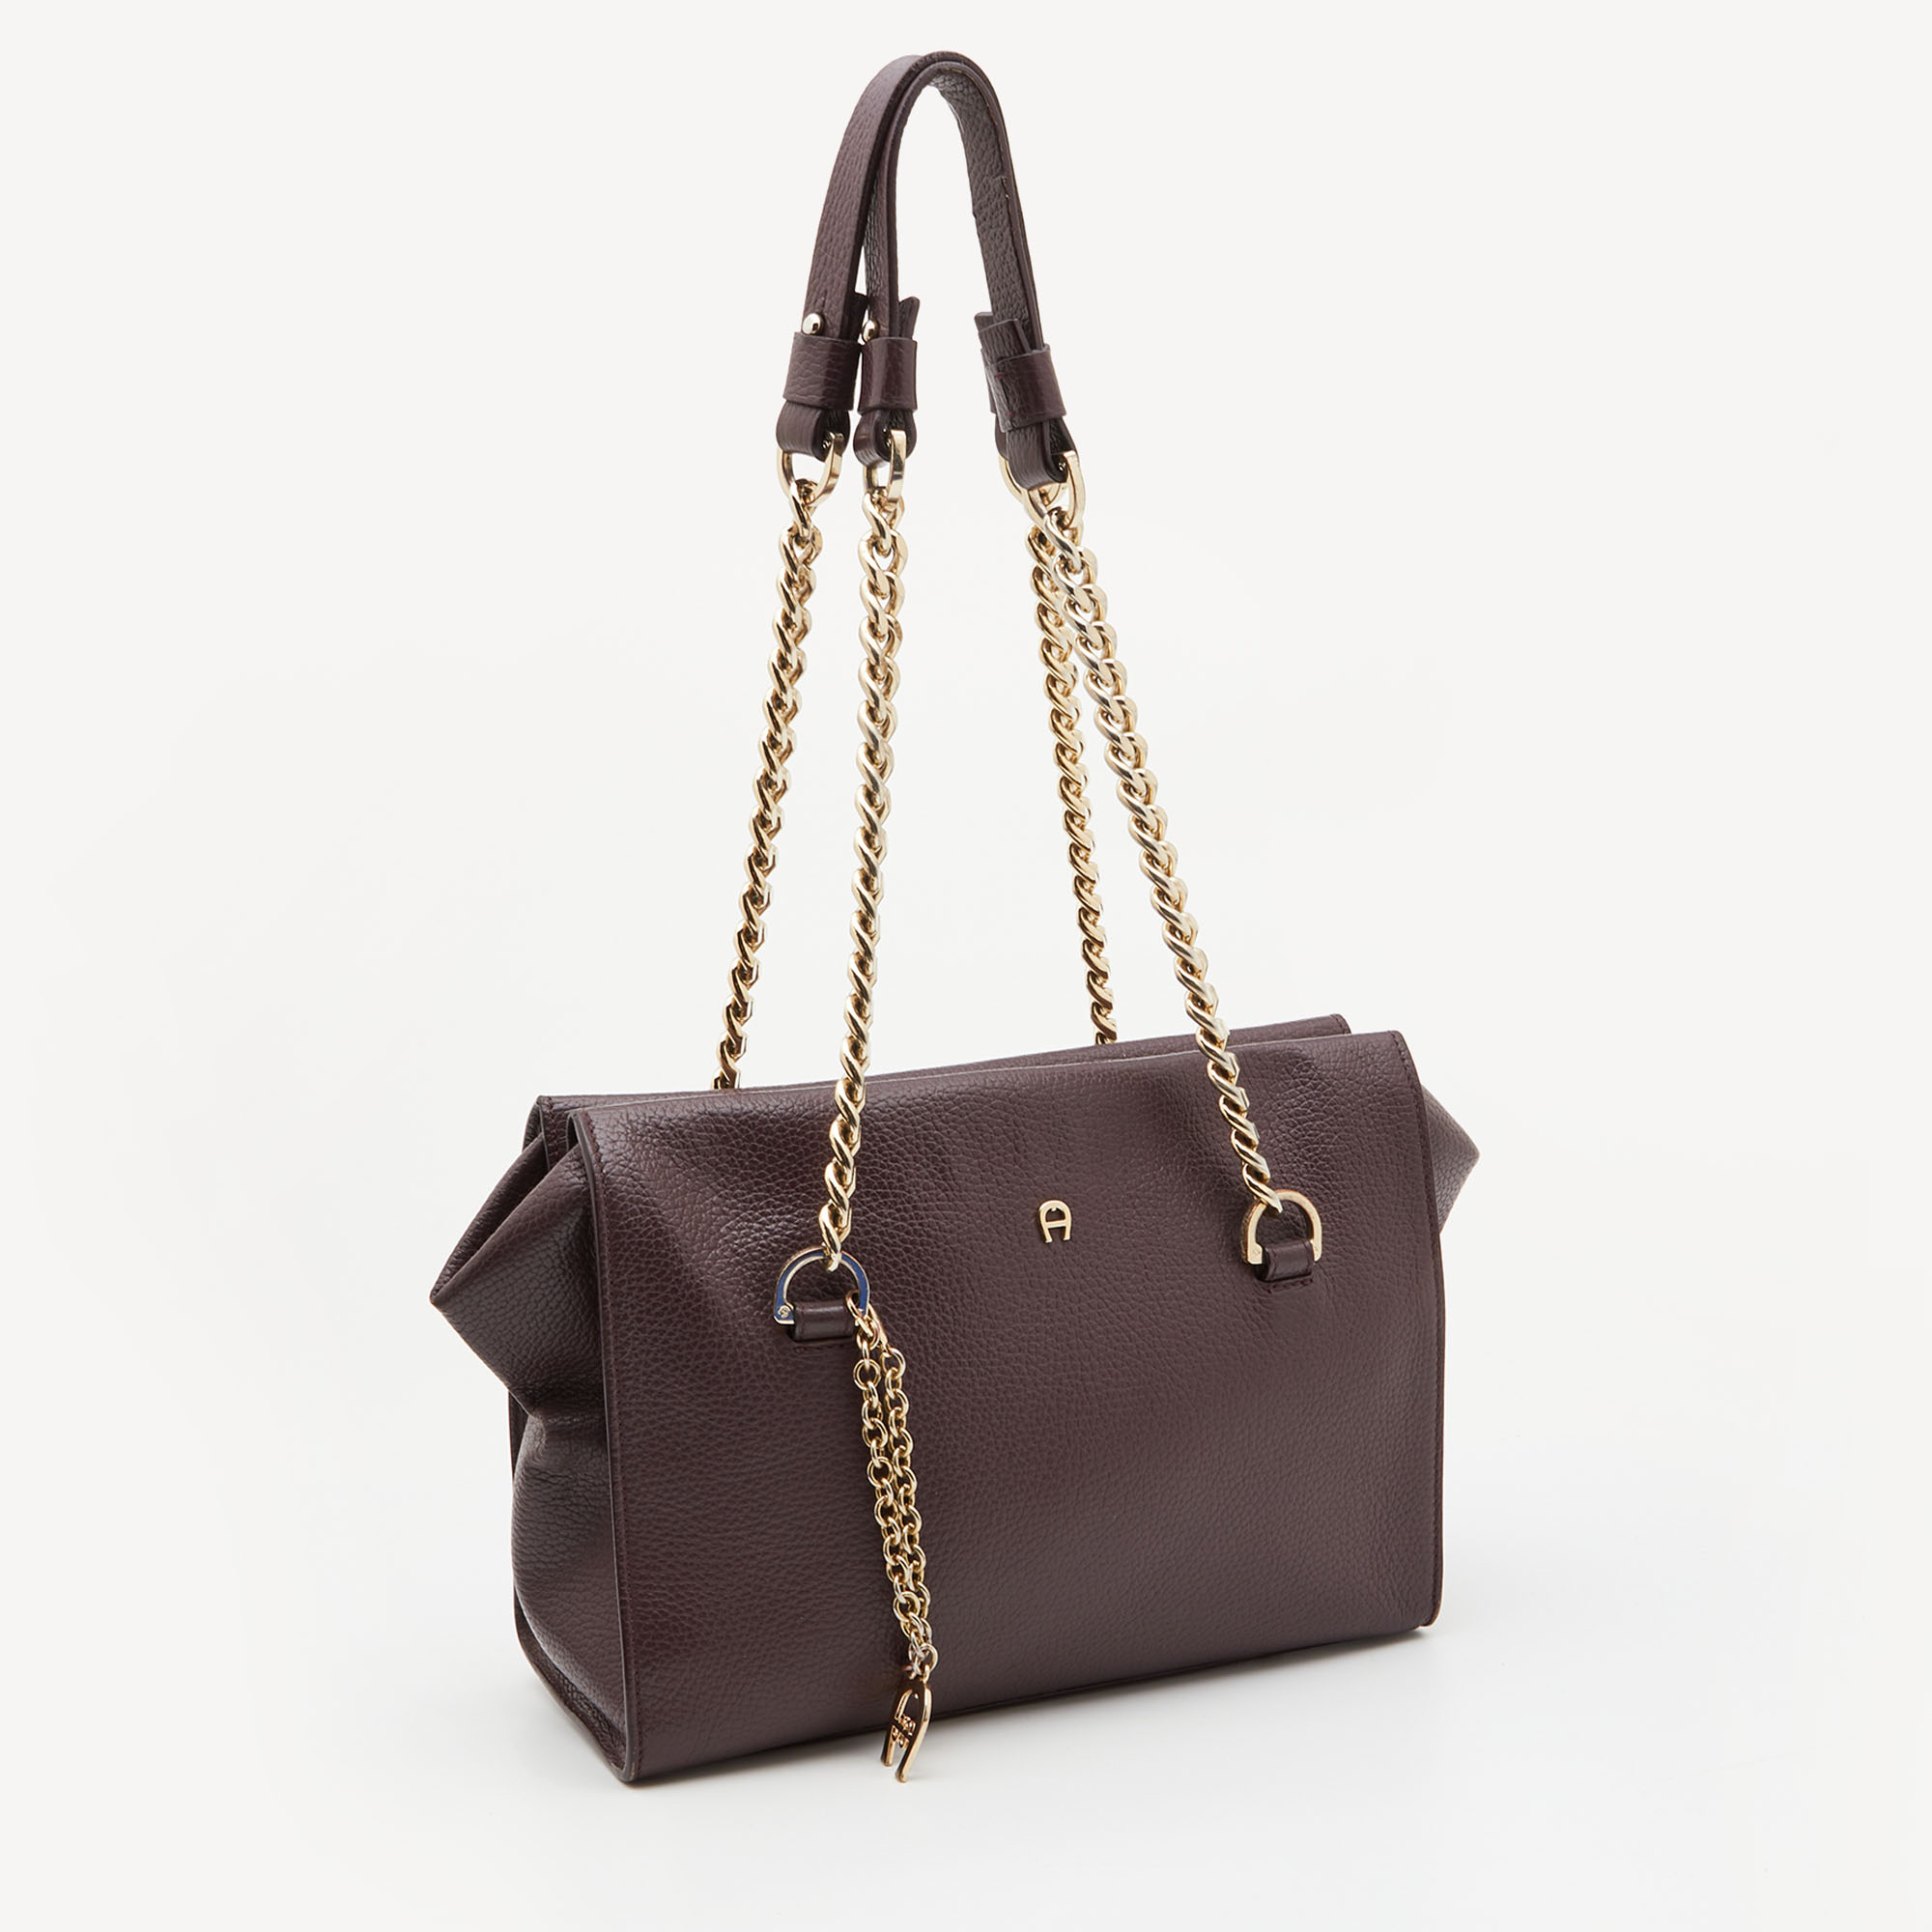 Aigner Burgundy Leather Chain Tote